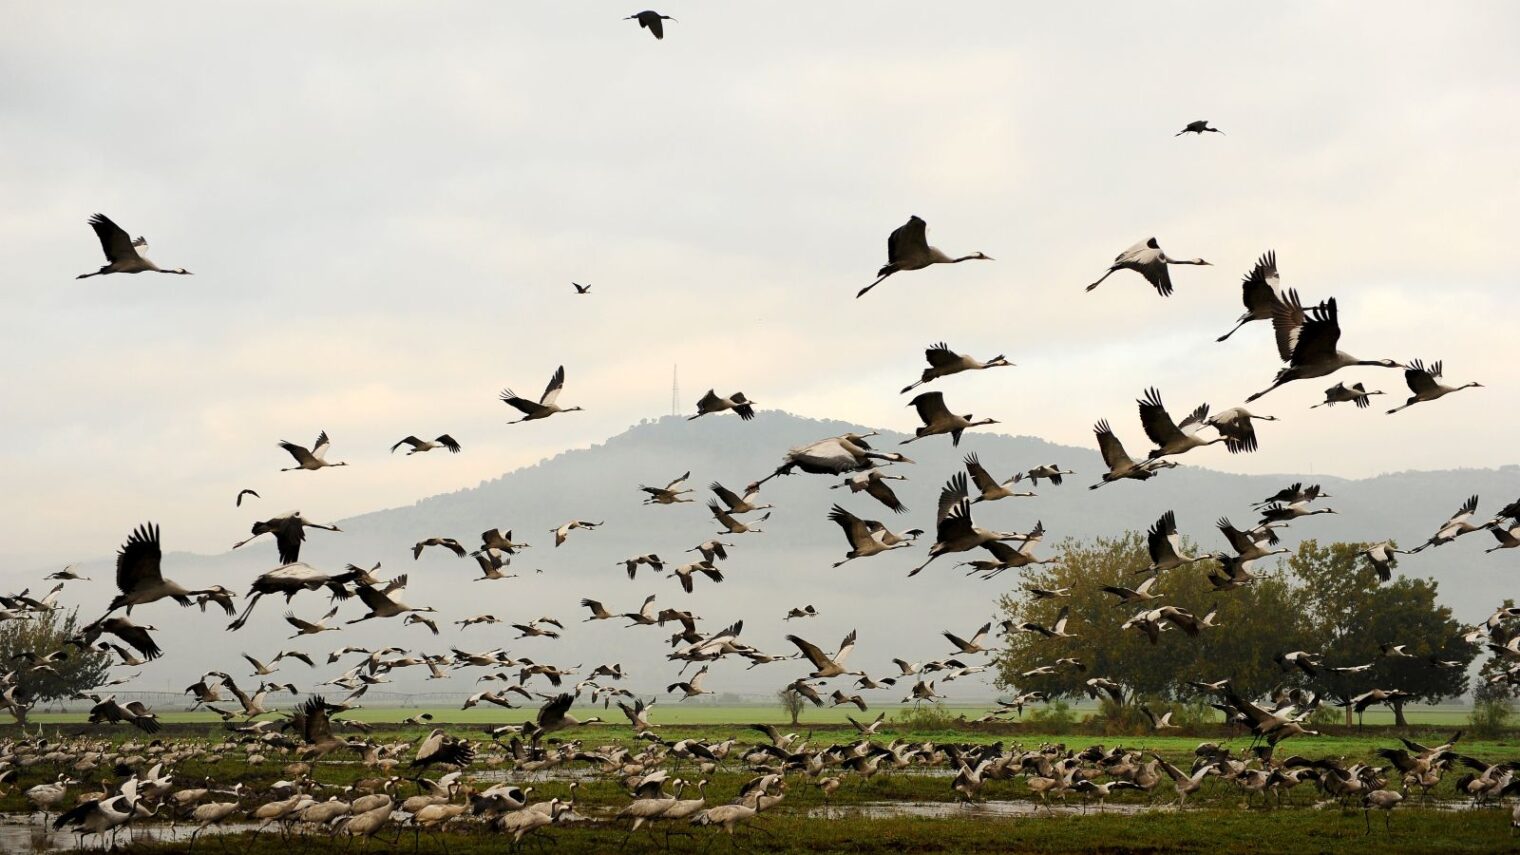 Israel is home to more than 220 bird species, some rare and some far more common. Photo by Mendy Hechtman/Flash90